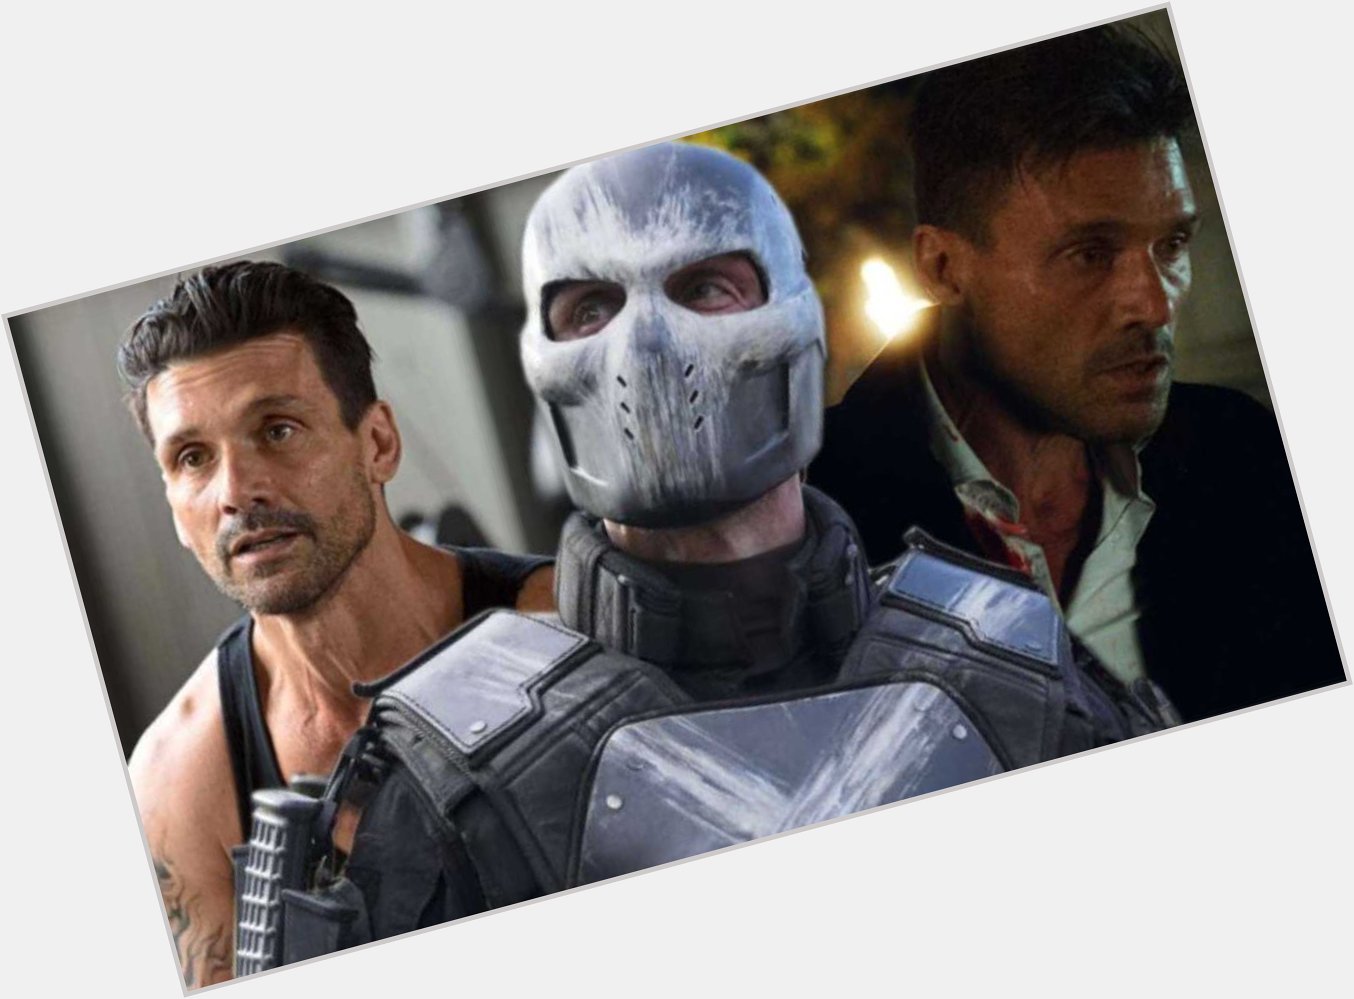 Happy 56th birthday to Frank Grillo!

If you like time loop stories, BOSS LEVEL was quite fun! 